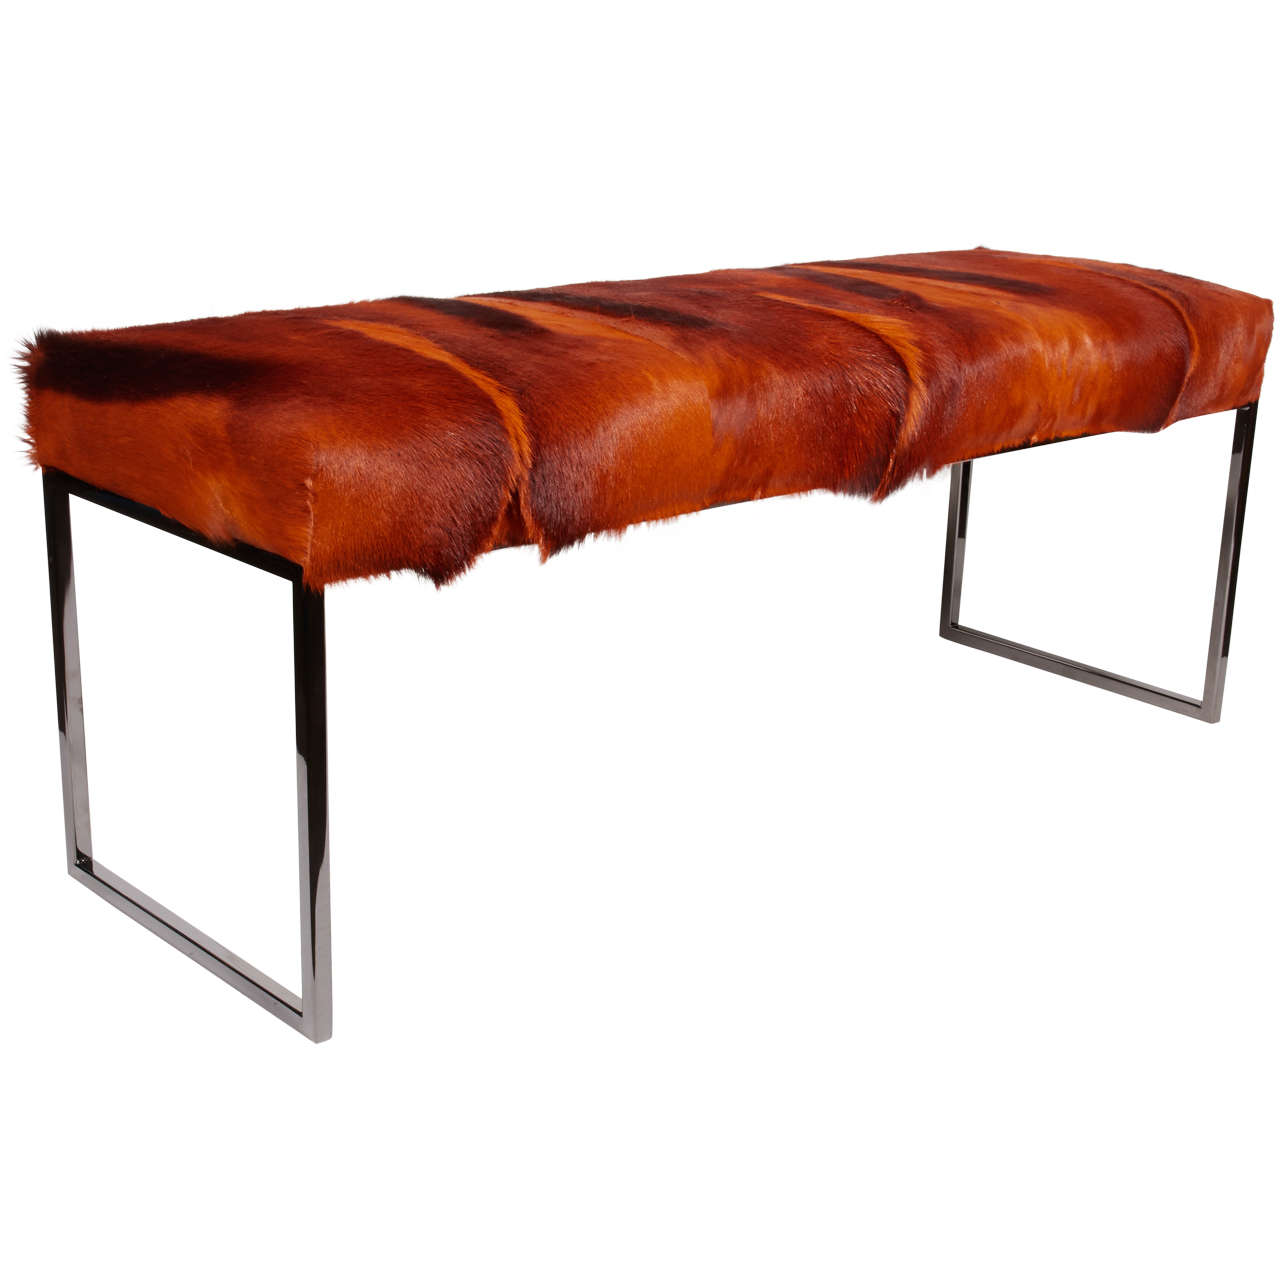 Exotic African springbok bench in hues of burnt orange. Mid-Century Modern design with streamline base in black chrome metal. Hand-dyed and comprised of several hides featuring multiple spine details. Excellent accent piece for any room.